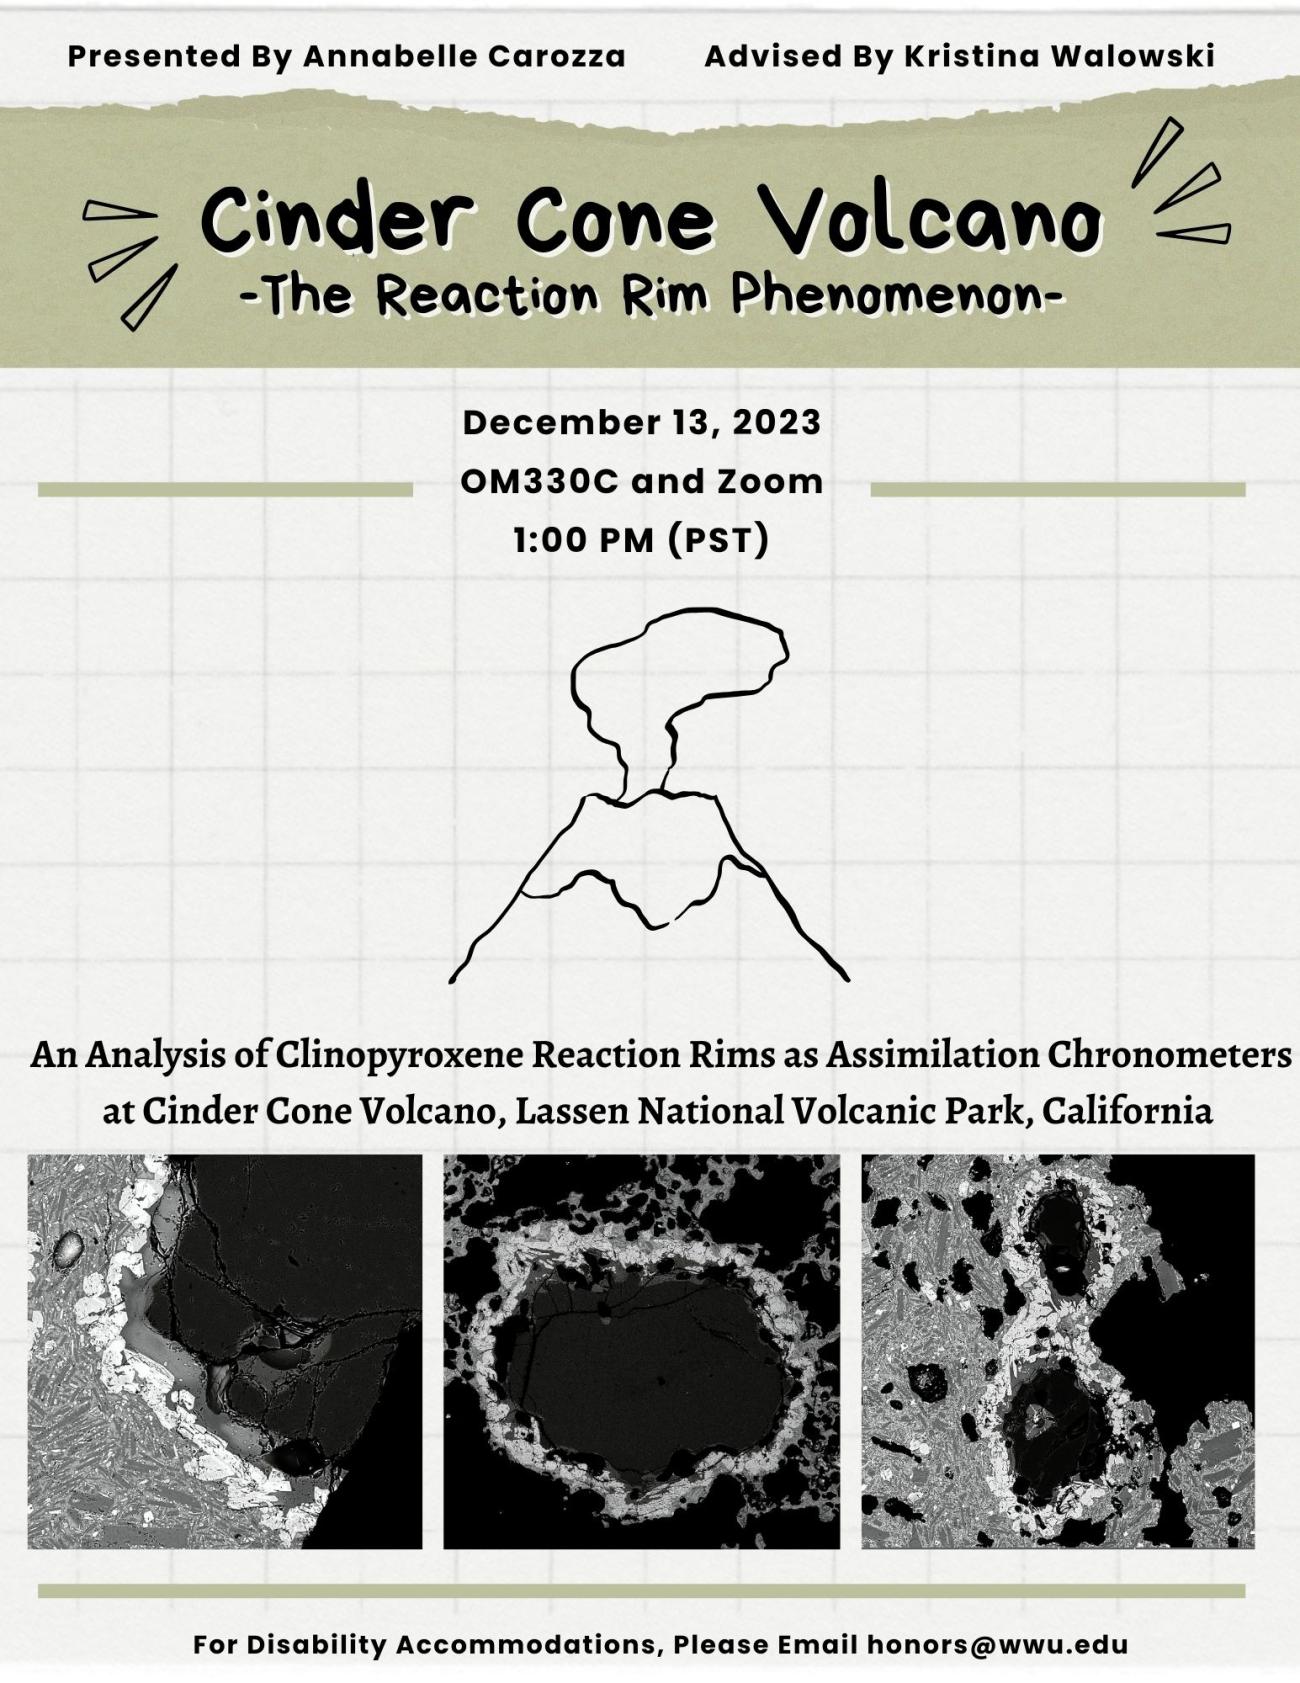 An illustration of an erupting volcano. Three micron-scale black and white scanning electron microscope (SEM) images of quartz surrounded by reaction rims are aligned at the bottom of the poster. Text reads "Presented by Annabelle Carozza, advised by Kristina Walowski. Cinder Cone Volcano, the reaction rim phenomenon. December 13, 2023 OM330C and zoom 1:00 PM (PST). An analysis of clinopyroxene reaction rims as assimilation chronometers at cinder cone volcano, Lassen National Volcanic Park, California.